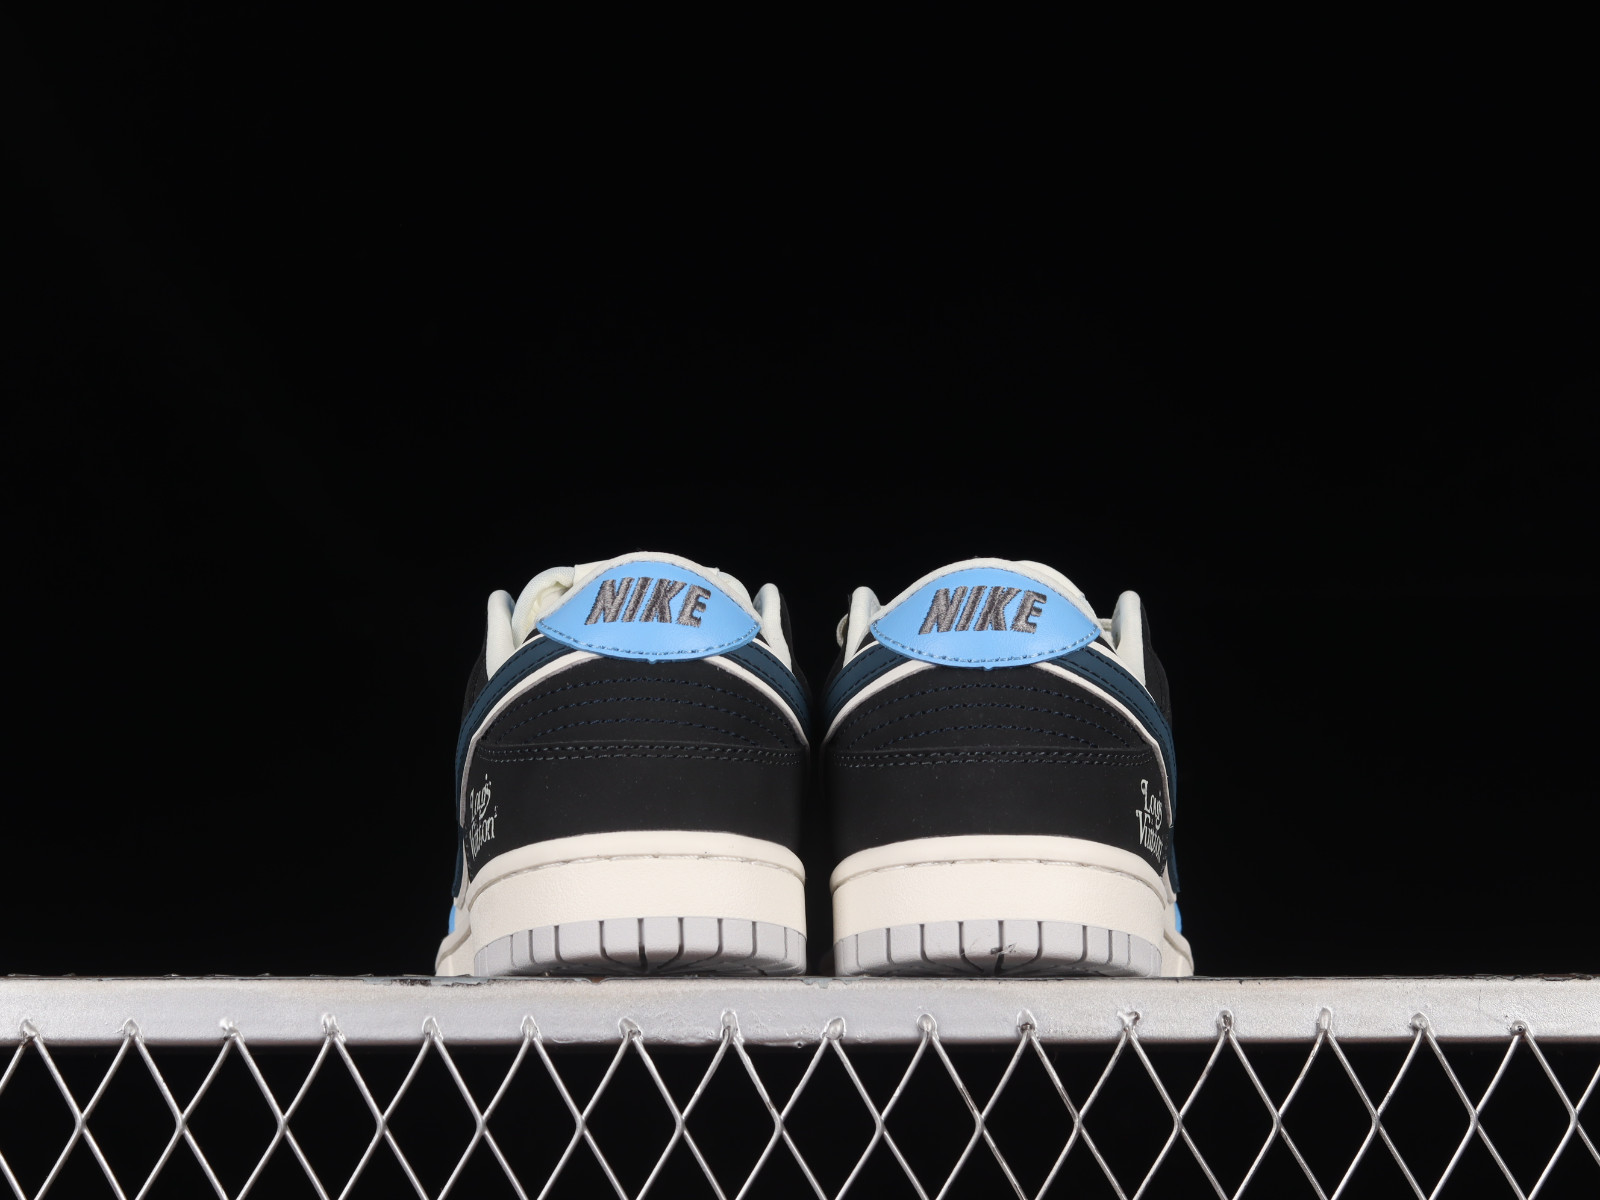 200 - MultiscaleconsultingShops - LV x Nike SB Dunk Low Navy Blue White  Black FC1688 - nike free hyper cheer shoe size guide